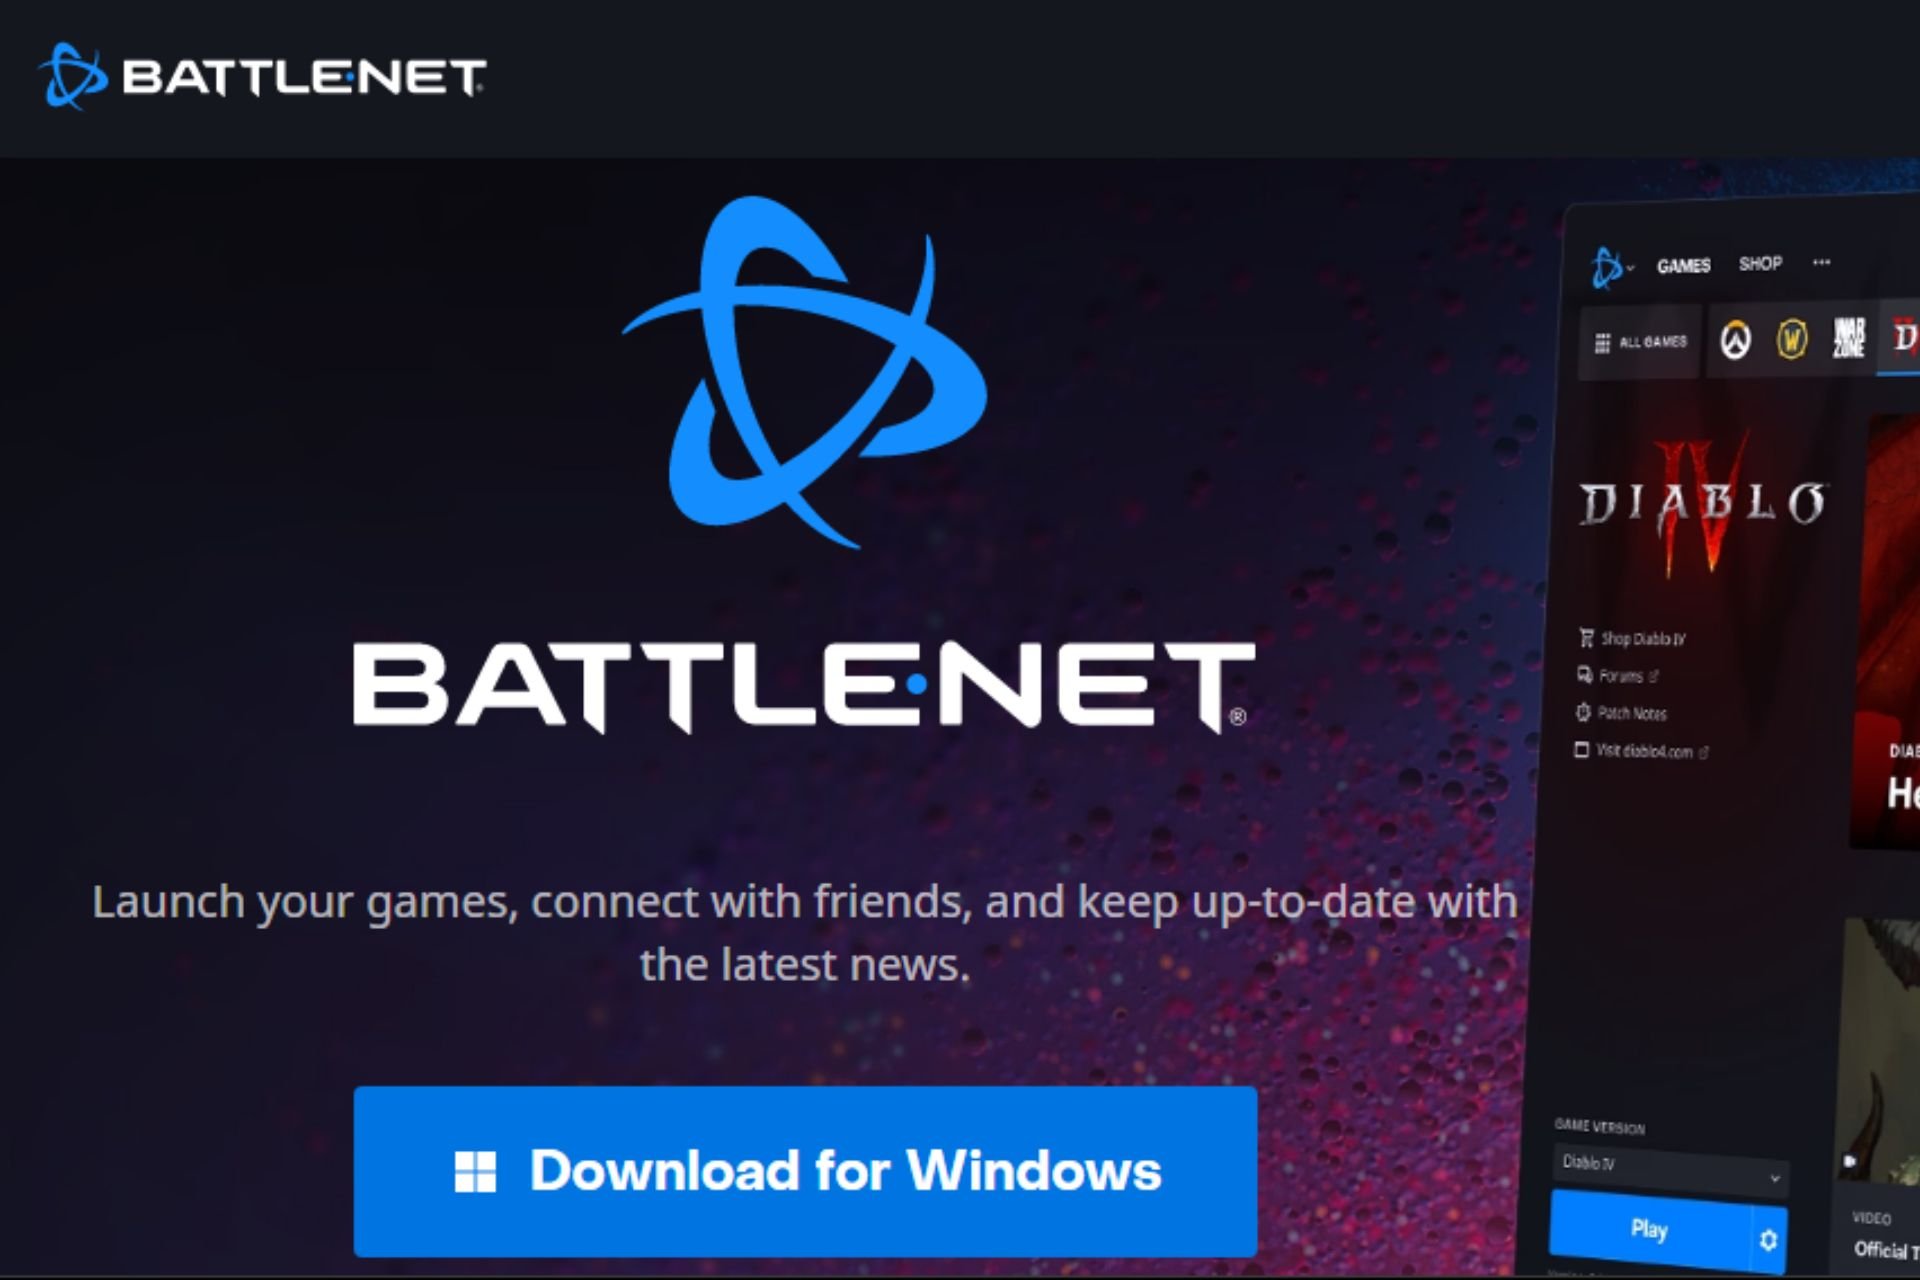 How to Download Battlenet [Windows, Mac & Android]